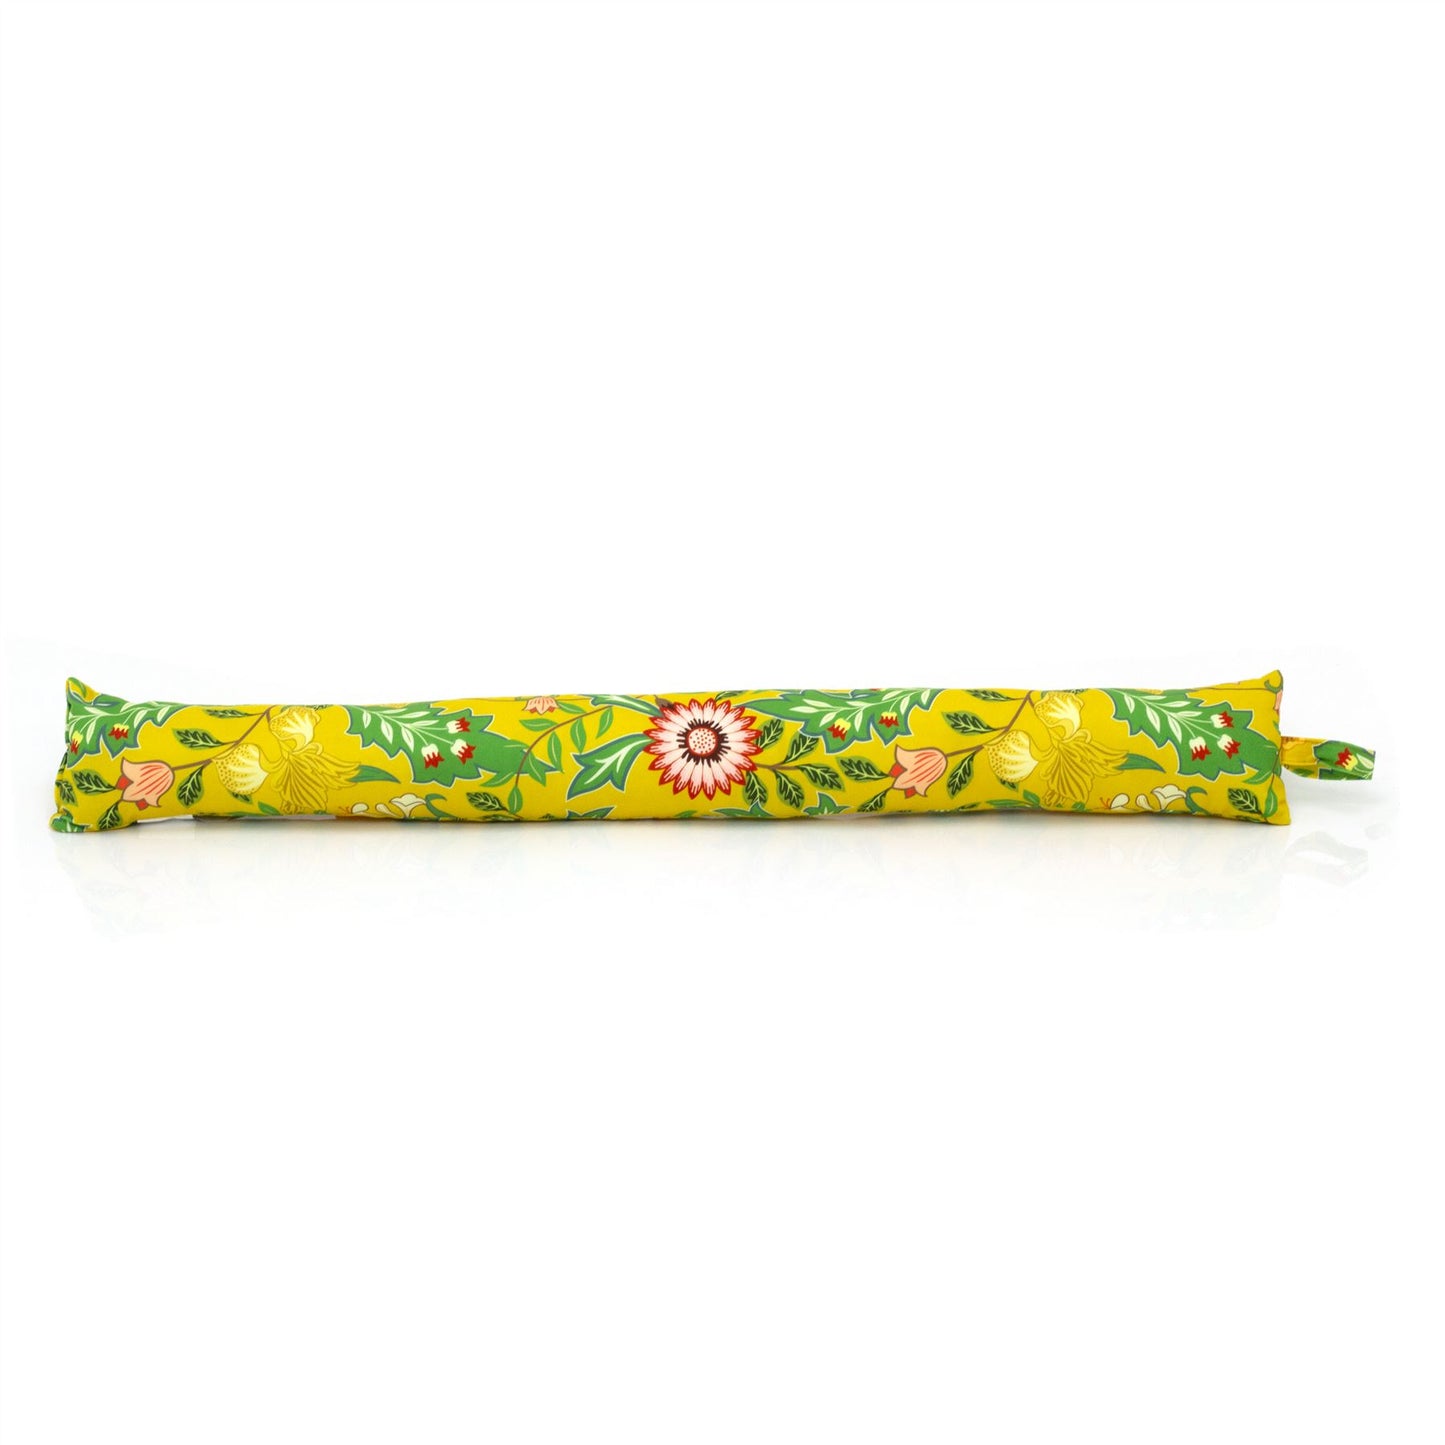 88cm Sussex Floral Fabric Door Draught Excluder | Winter Draft Excluder Door Cushion | Flower Draught Excluder For Doors Door Draught Cushion - Yellow